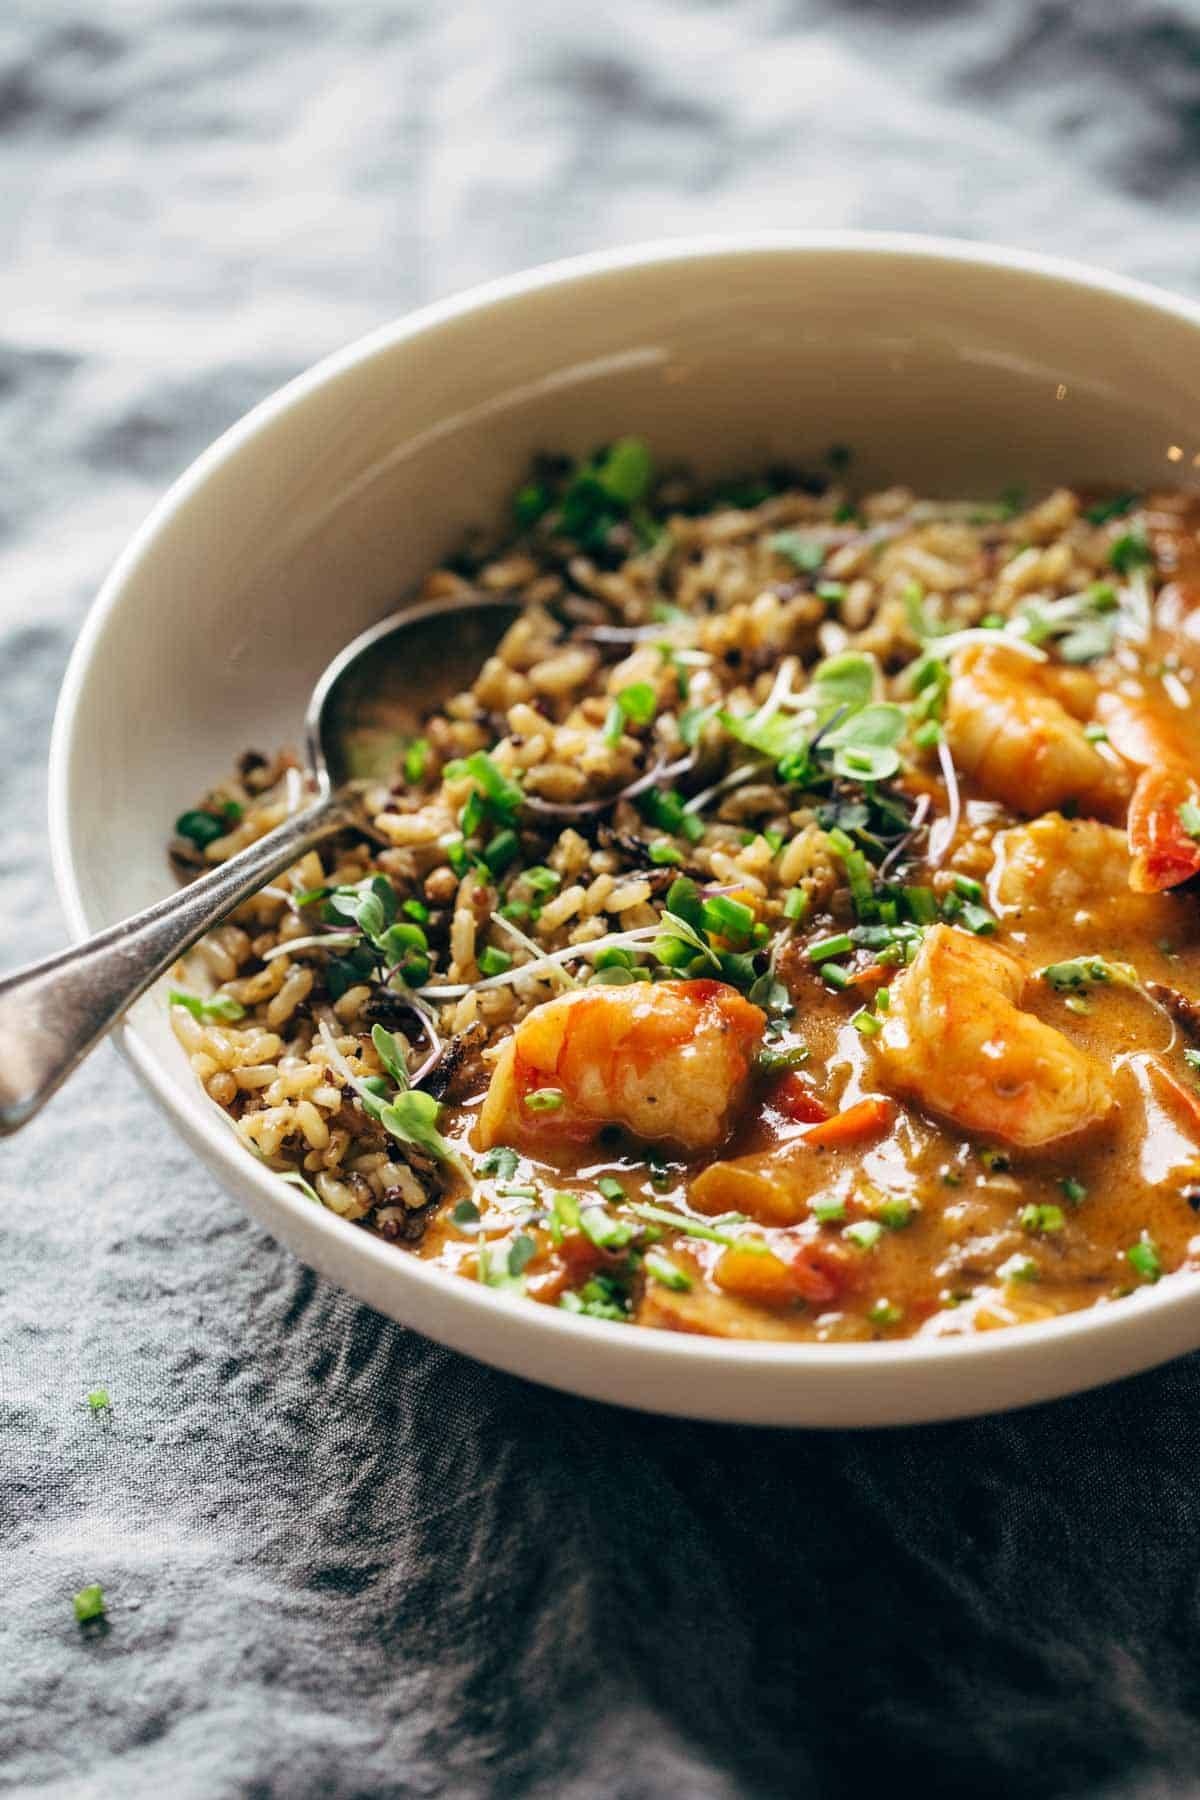 Shrimp and rice in a bowl with a spoon.